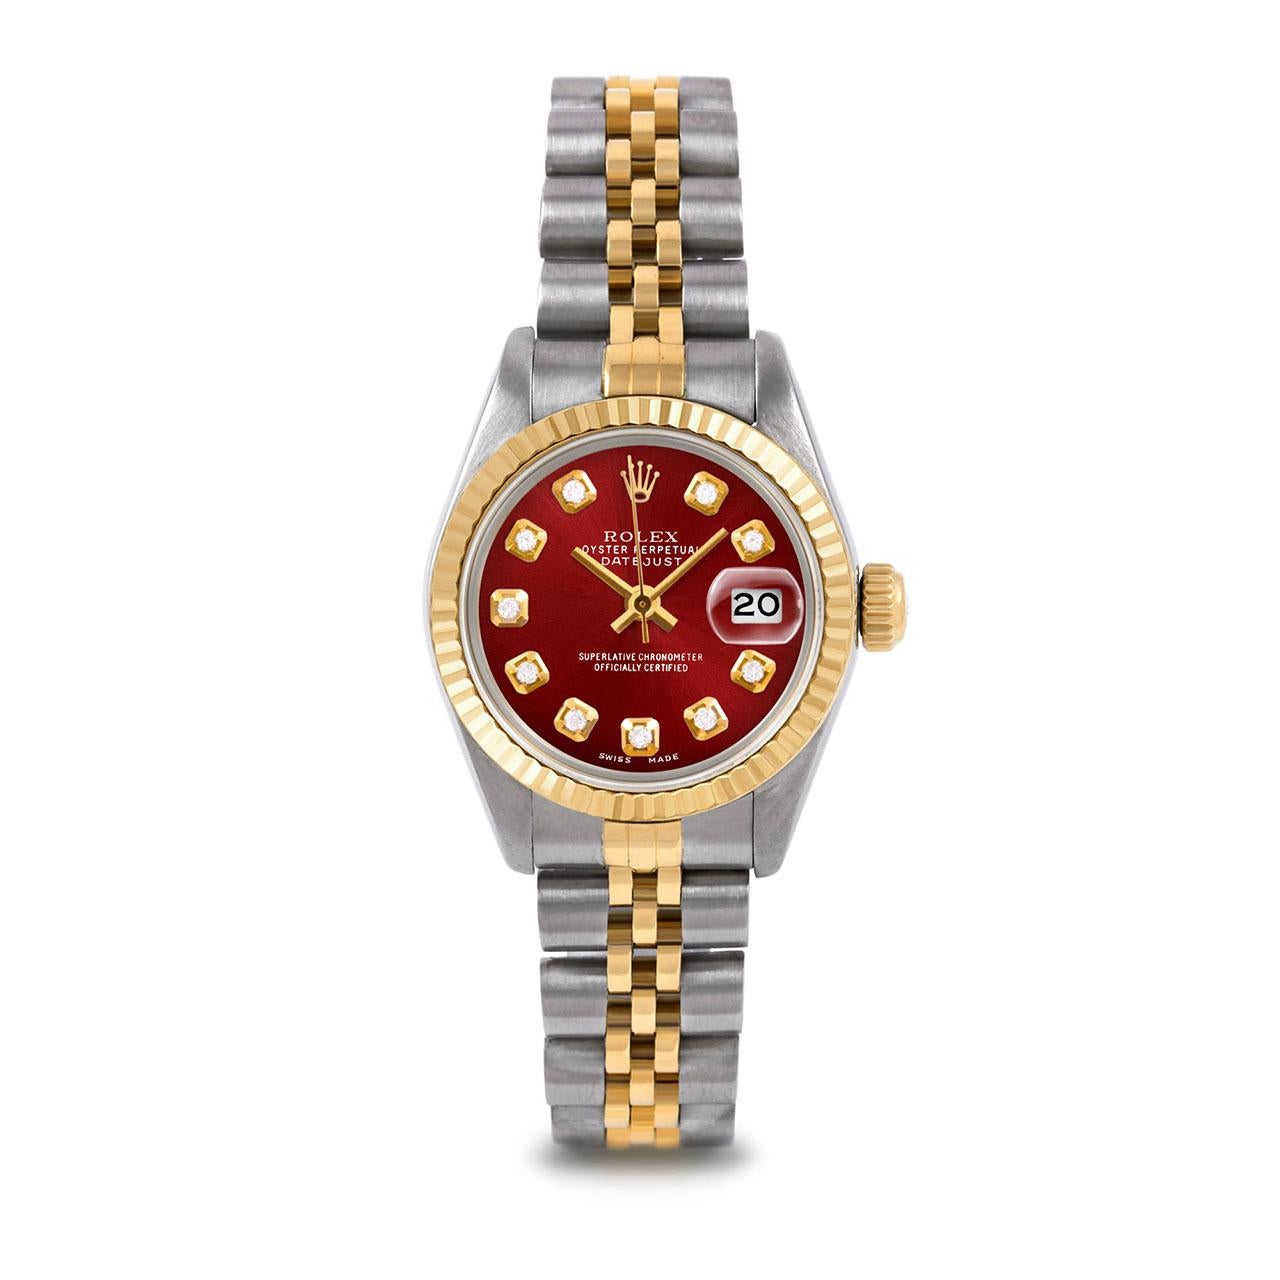 Pre-Owned Rolex 6917 Ladies 26mm Two Tone Datejust Watch, Custom Red Diamond Dial & Fluted Bezel on Rolex 14K Yellow Gold And Stainless Steel Jubilee Band.   

SKU 6917-TT-RED-DIA-AM-FLT-JBL


Brand/Model:        Rolex Datejust
Model Number:       